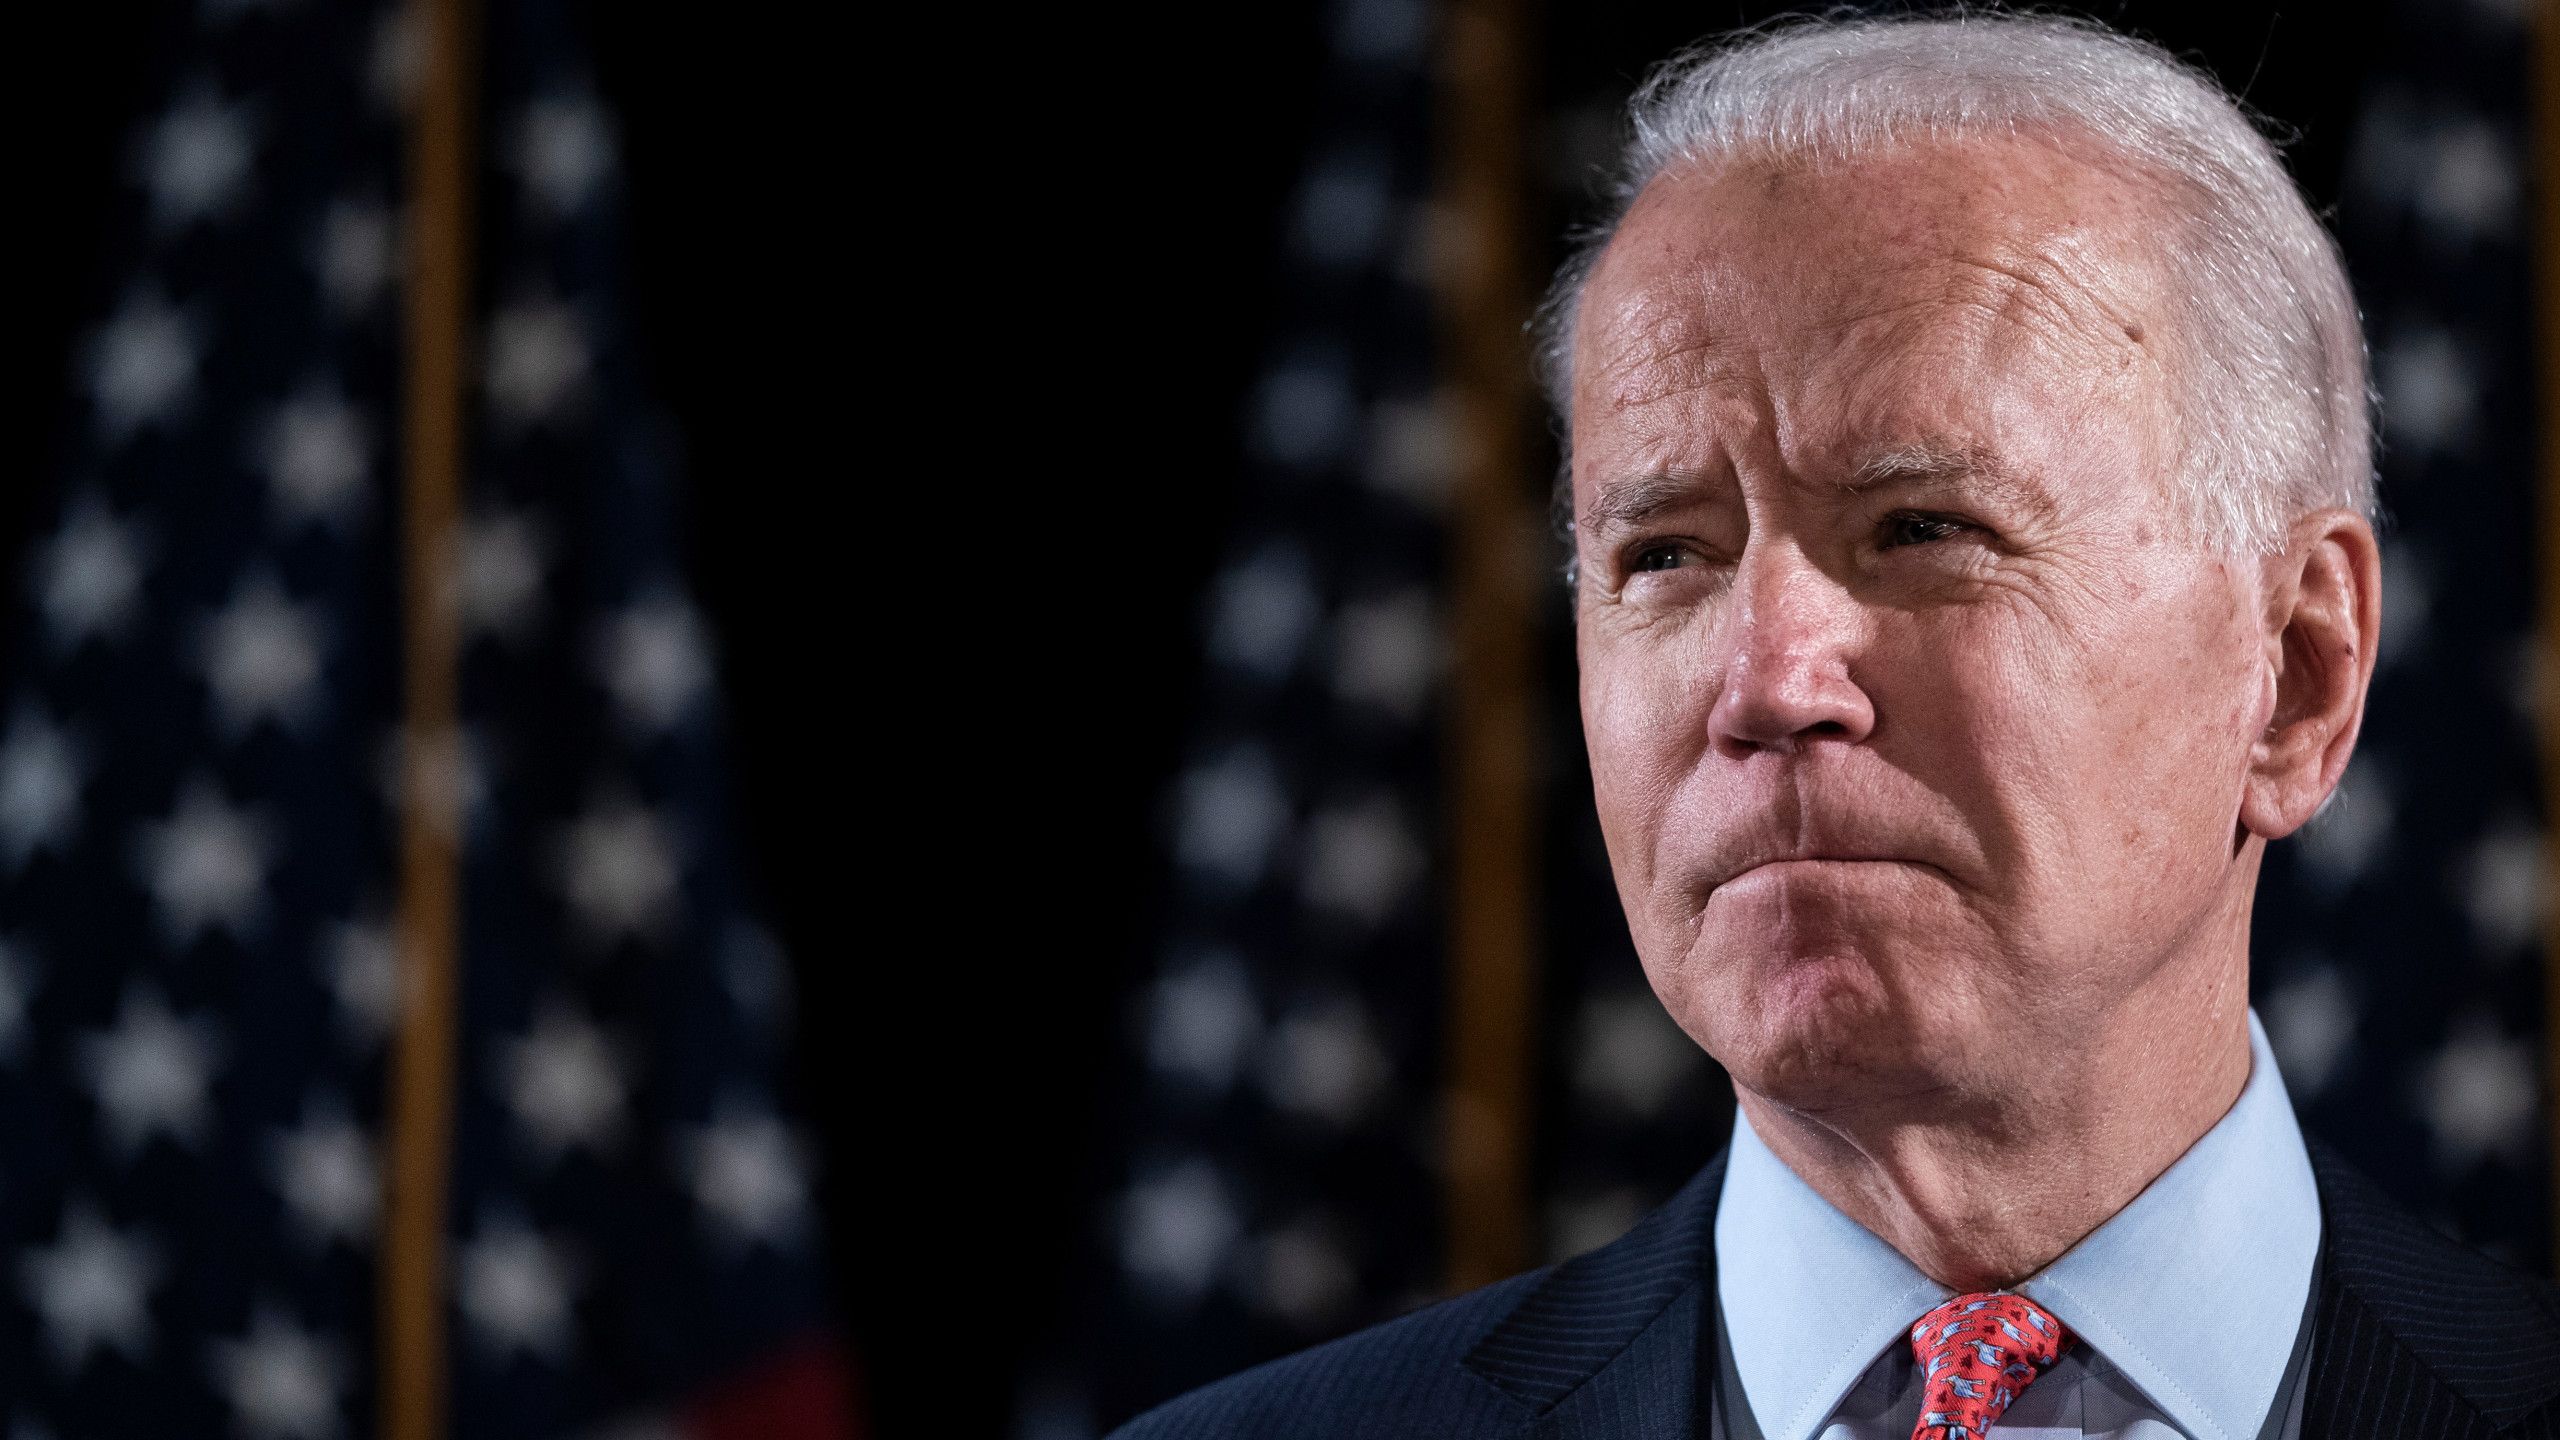 Joe Biden plans to continue campaigning from home amid pandemic